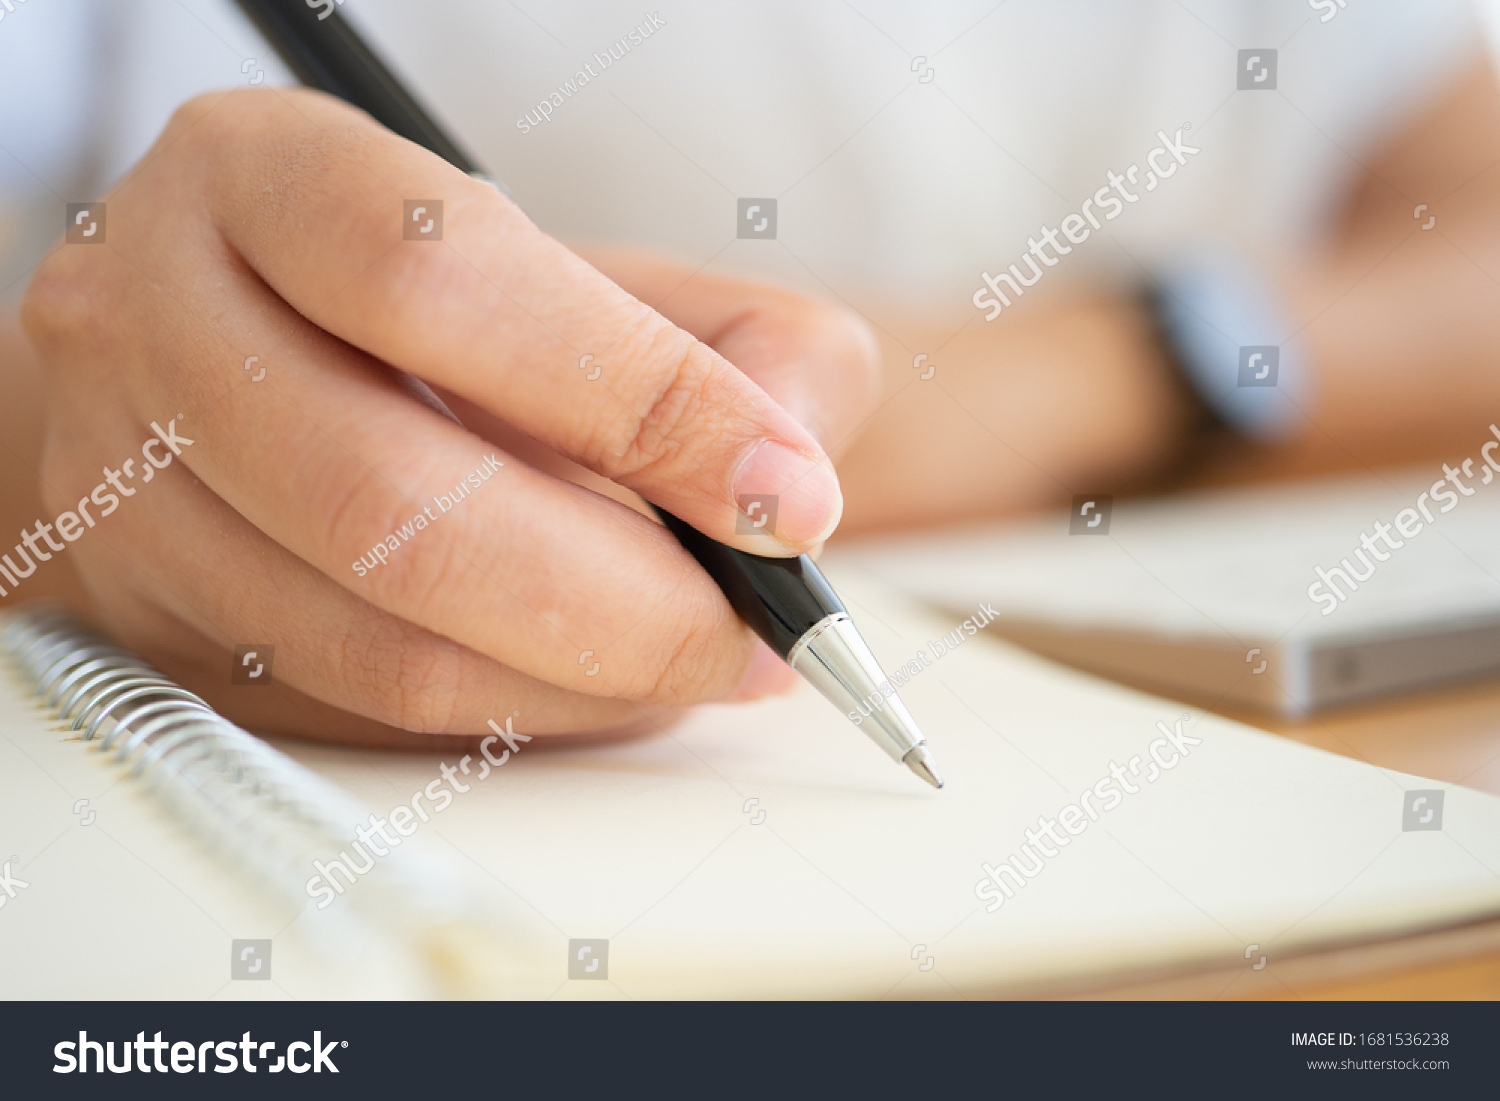 Close shot of businesswoman hands holding a pen writing something on the paper on the foreground in office. Recording concept #1681536238